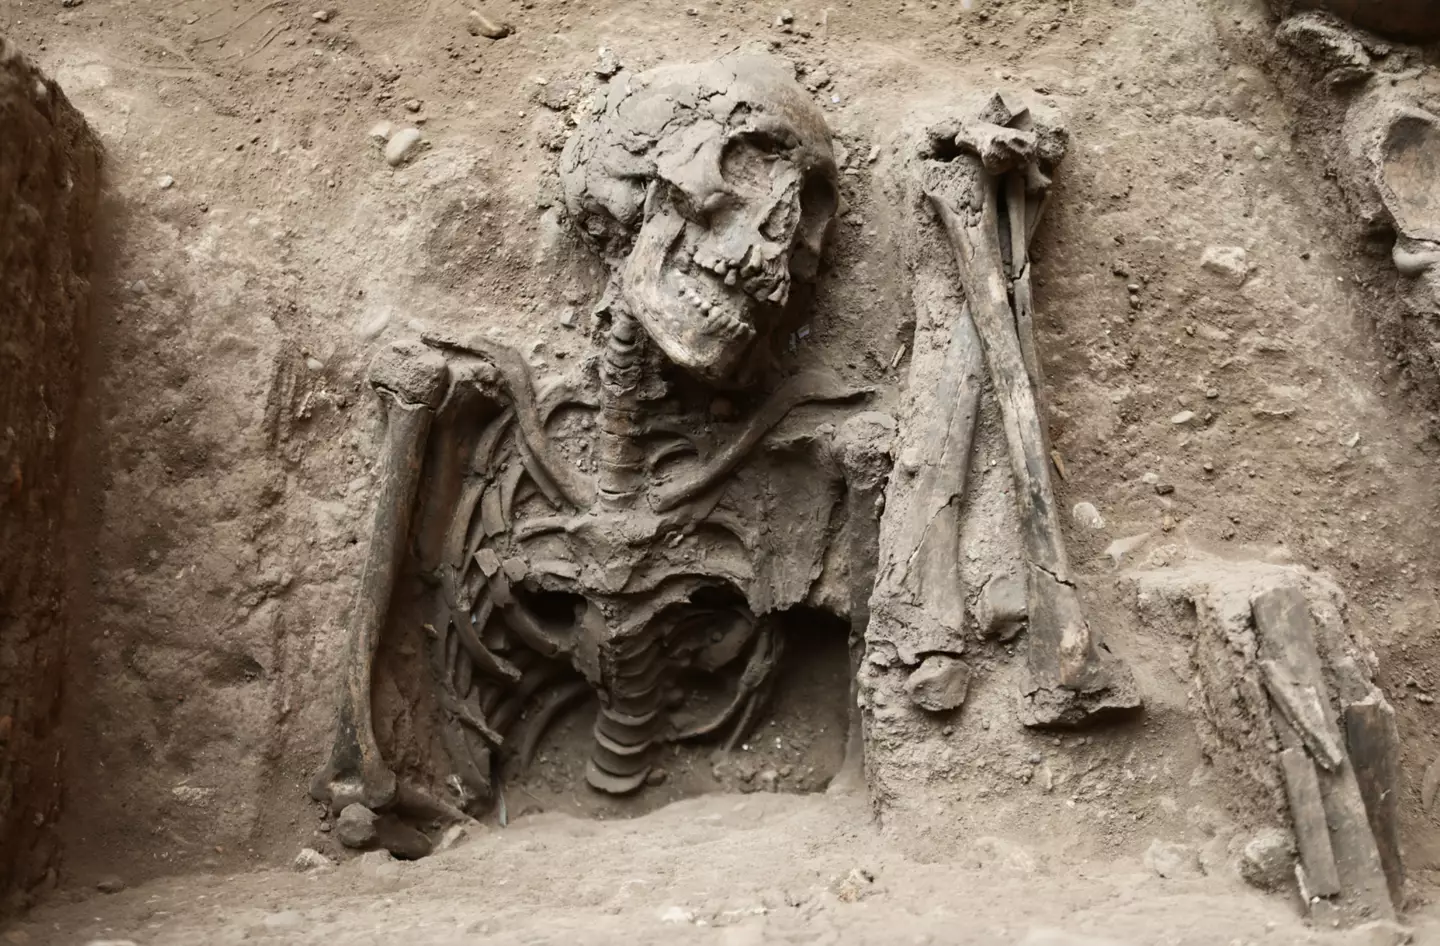 Archaeologists have unearthed the remains of 42 humans.